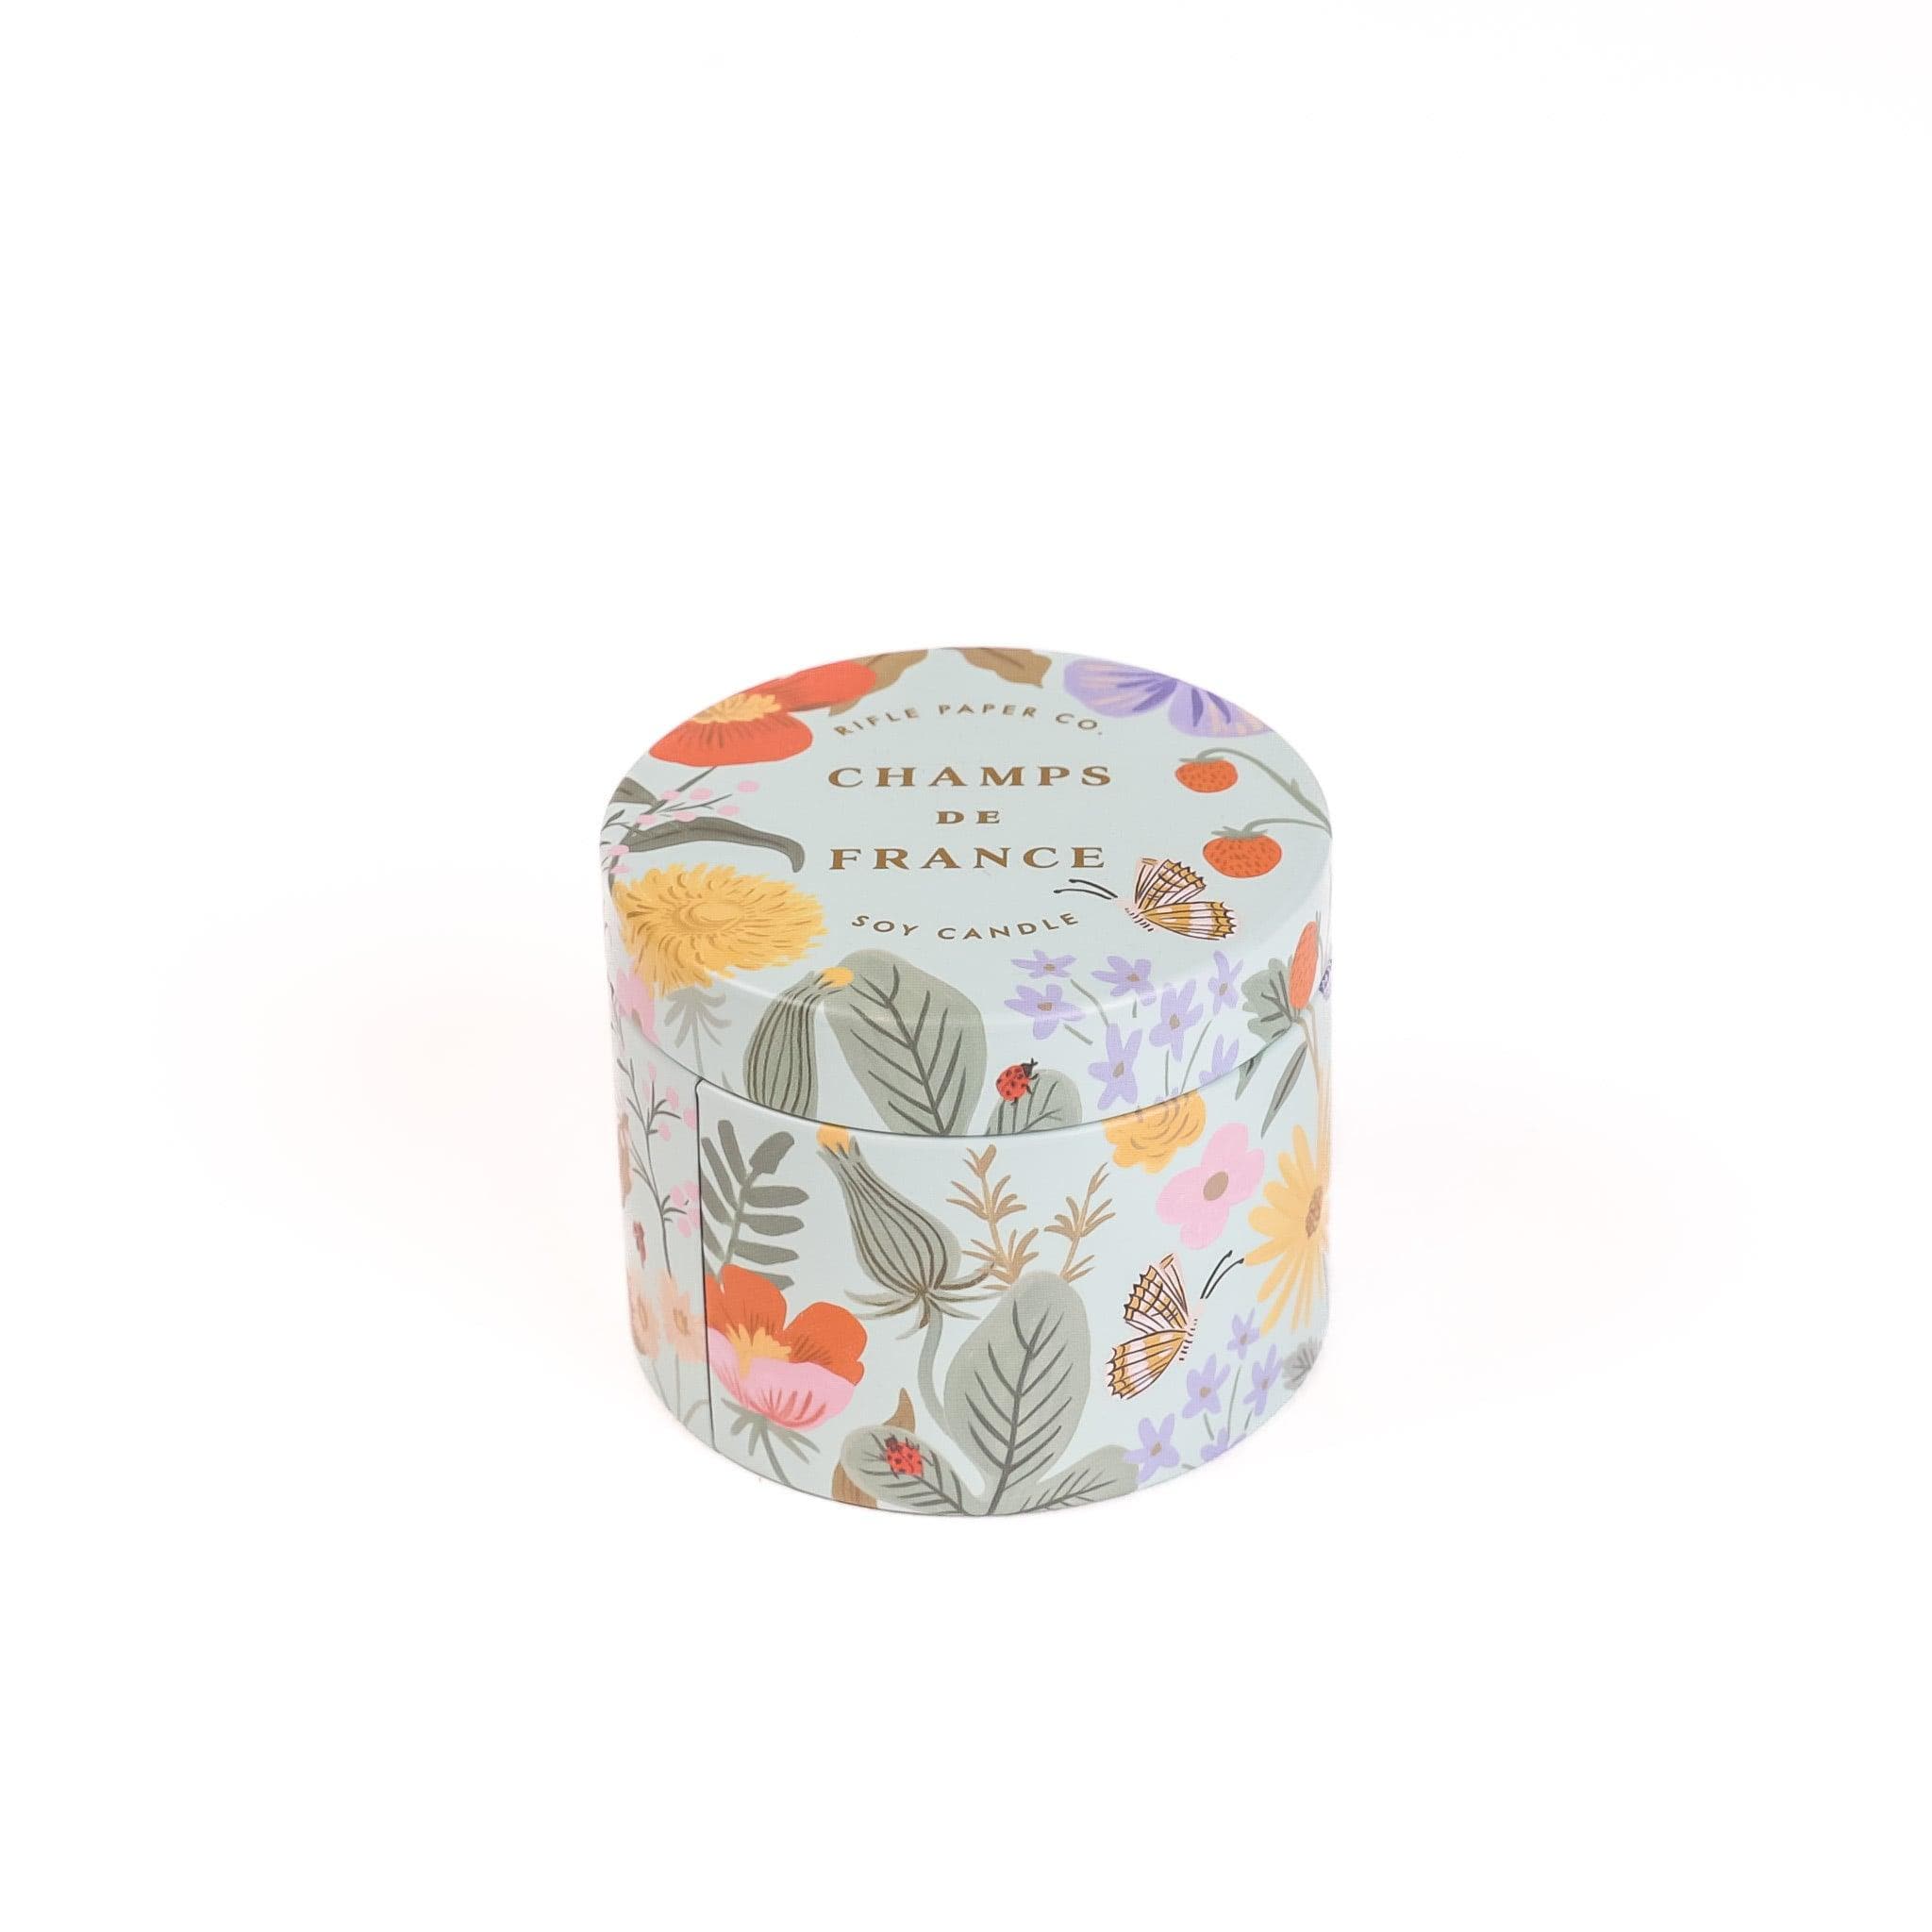 Rifle Illustrated Tin Candles - Green Fresh Florals + Plants